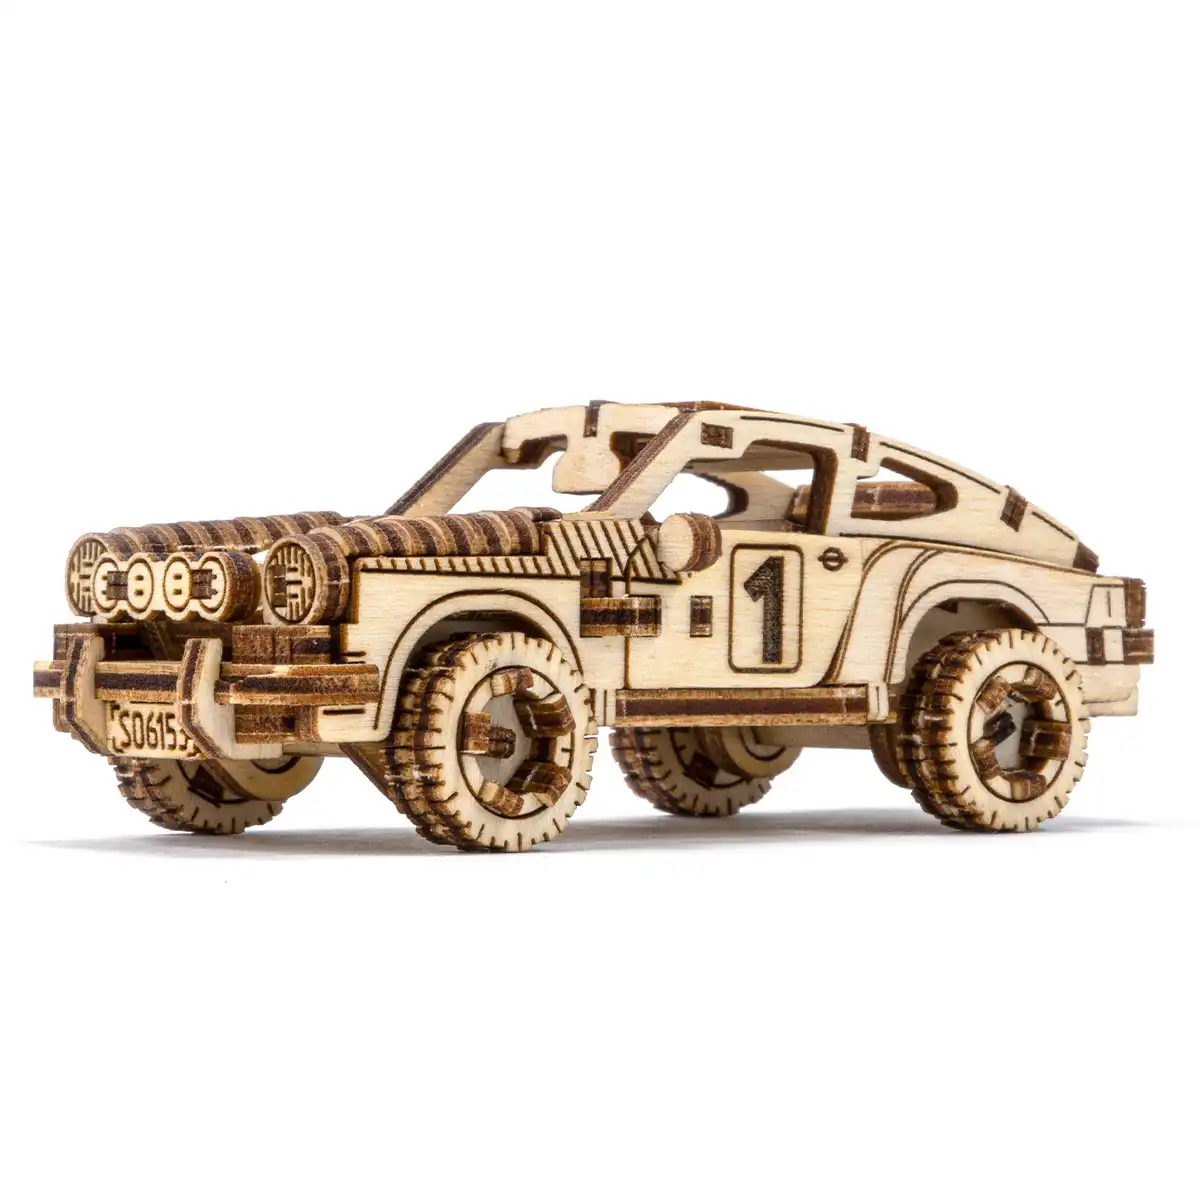 WOODEN.CITY Vintage Cars Monster Truck 2 - DIY 3D Wooden Model Kits for  Adults to Build Cars - 3D Wooden Puzzles for Adults Brain Teaser - Wood Car